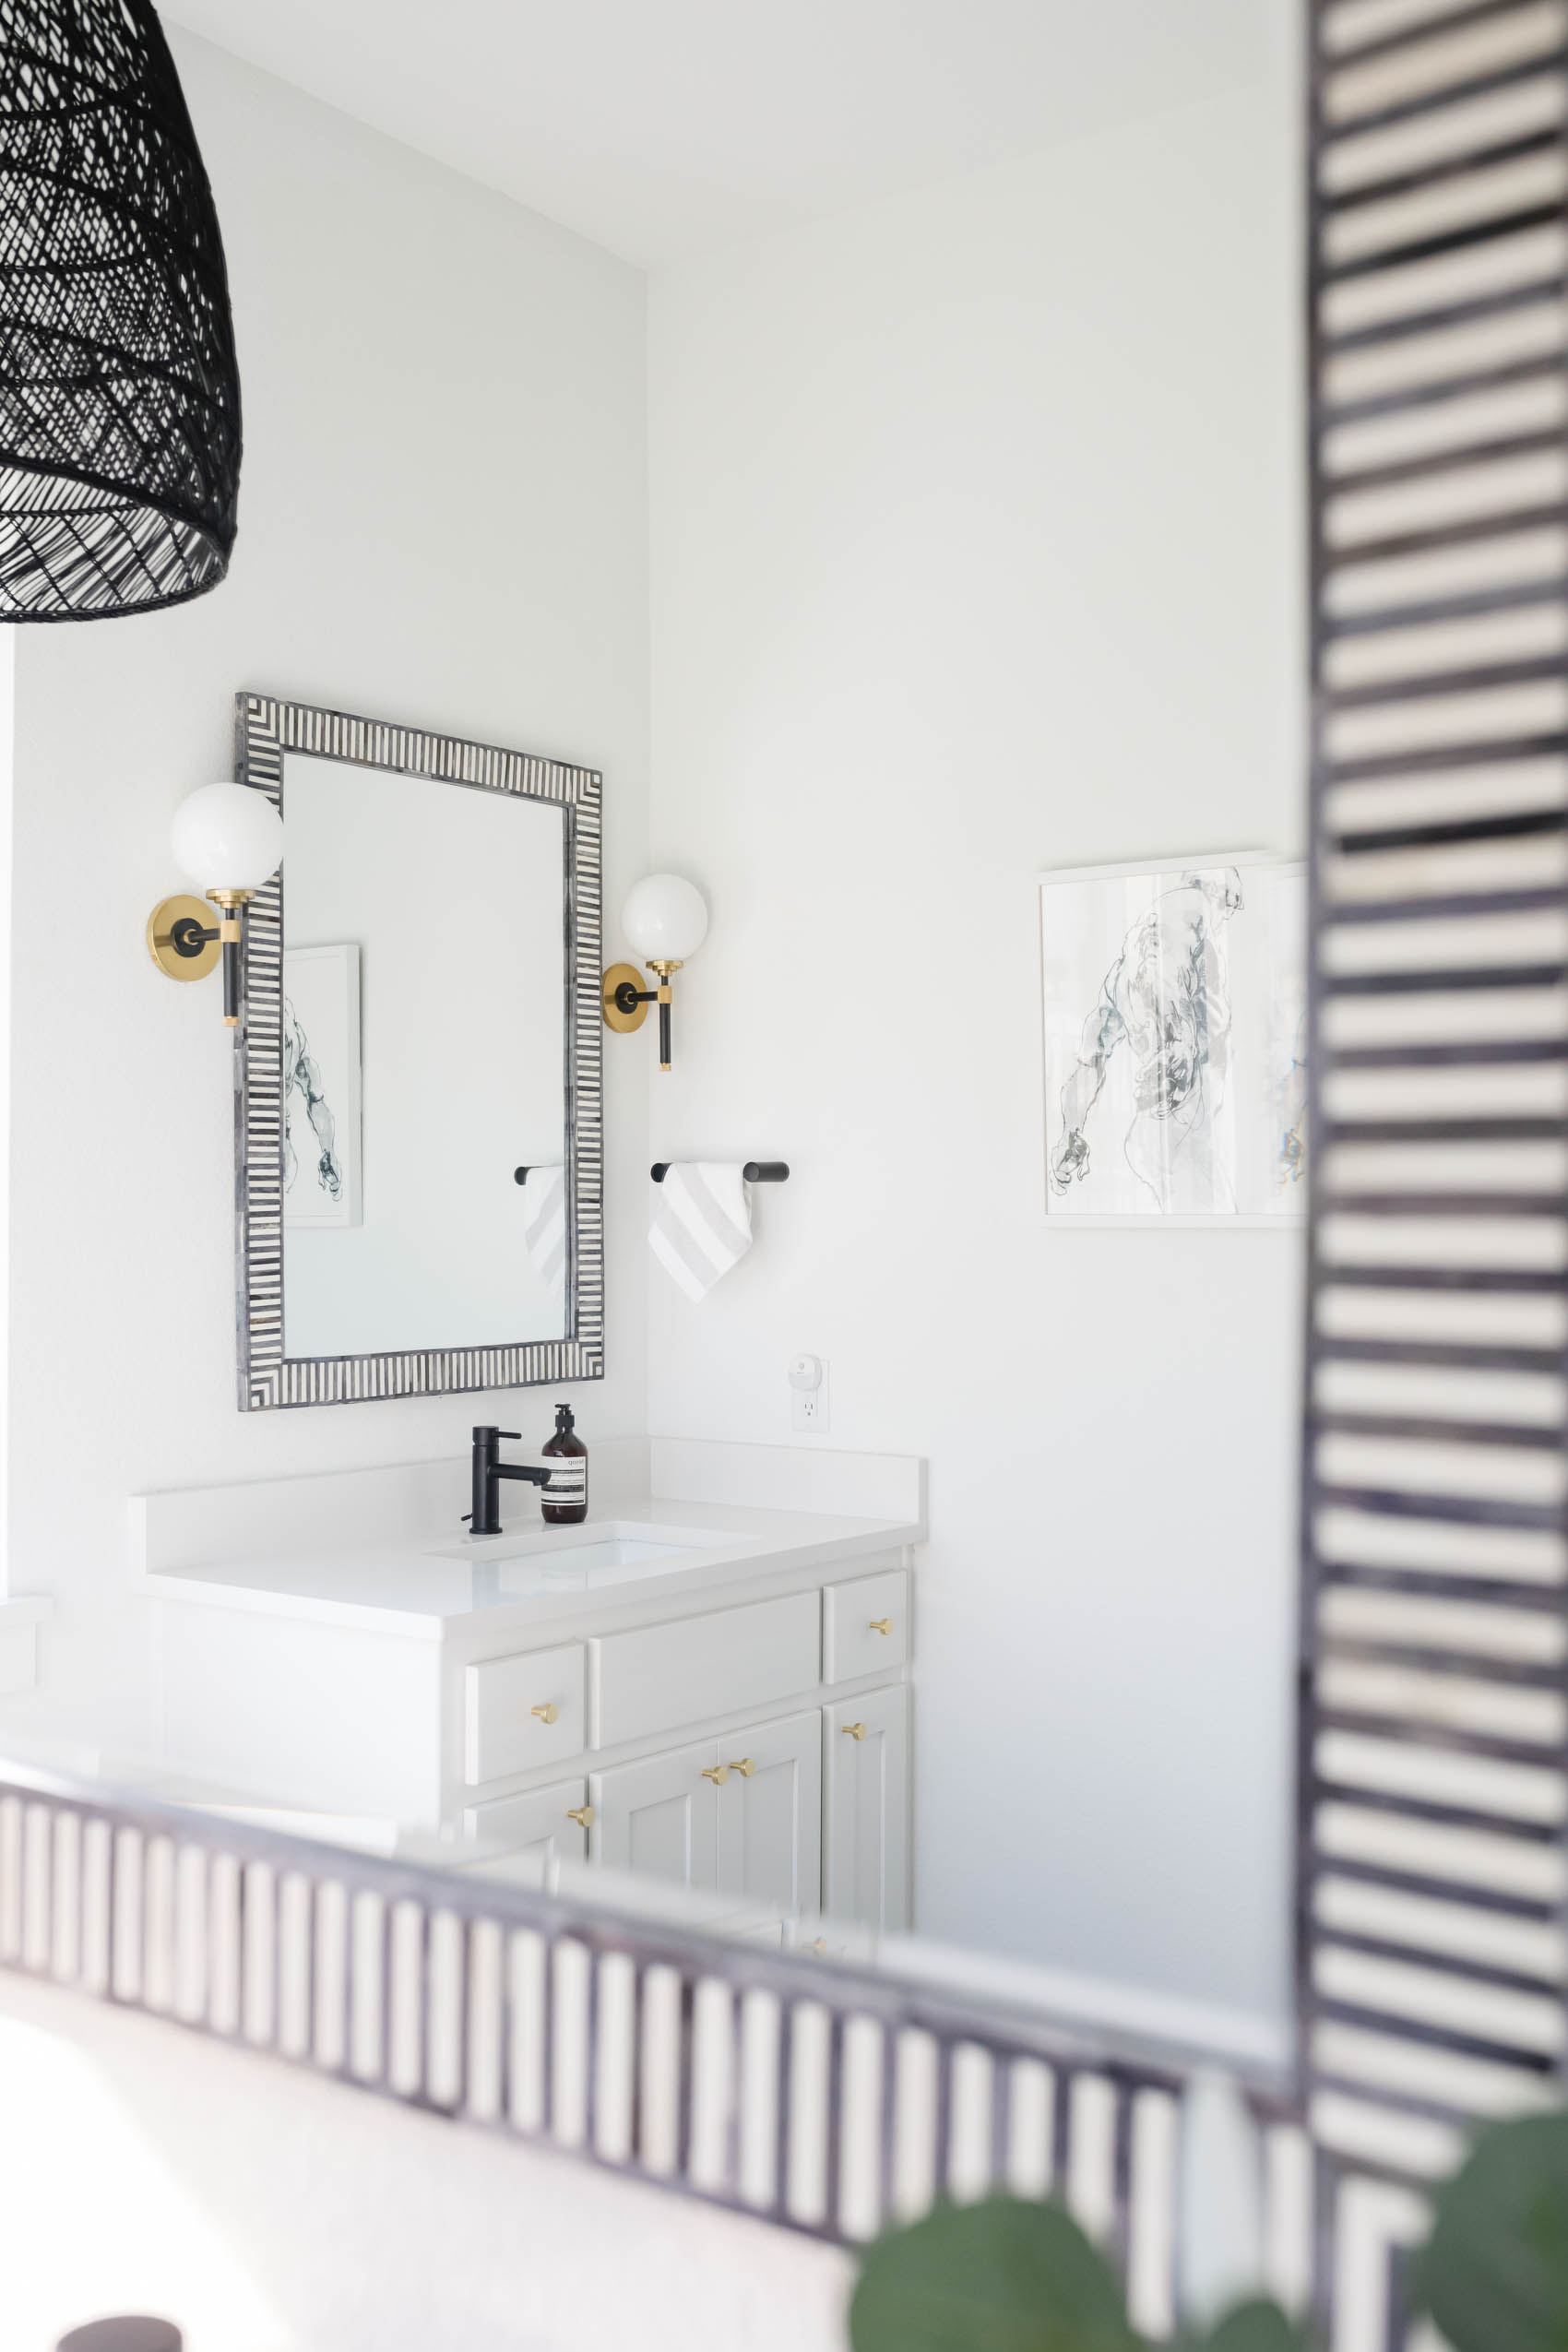 White transitional bathroom with luxury bathroom accessories like Serena & Lily bar harbor mirrors in fog, Hudson Valley Bowery Sconce and more.